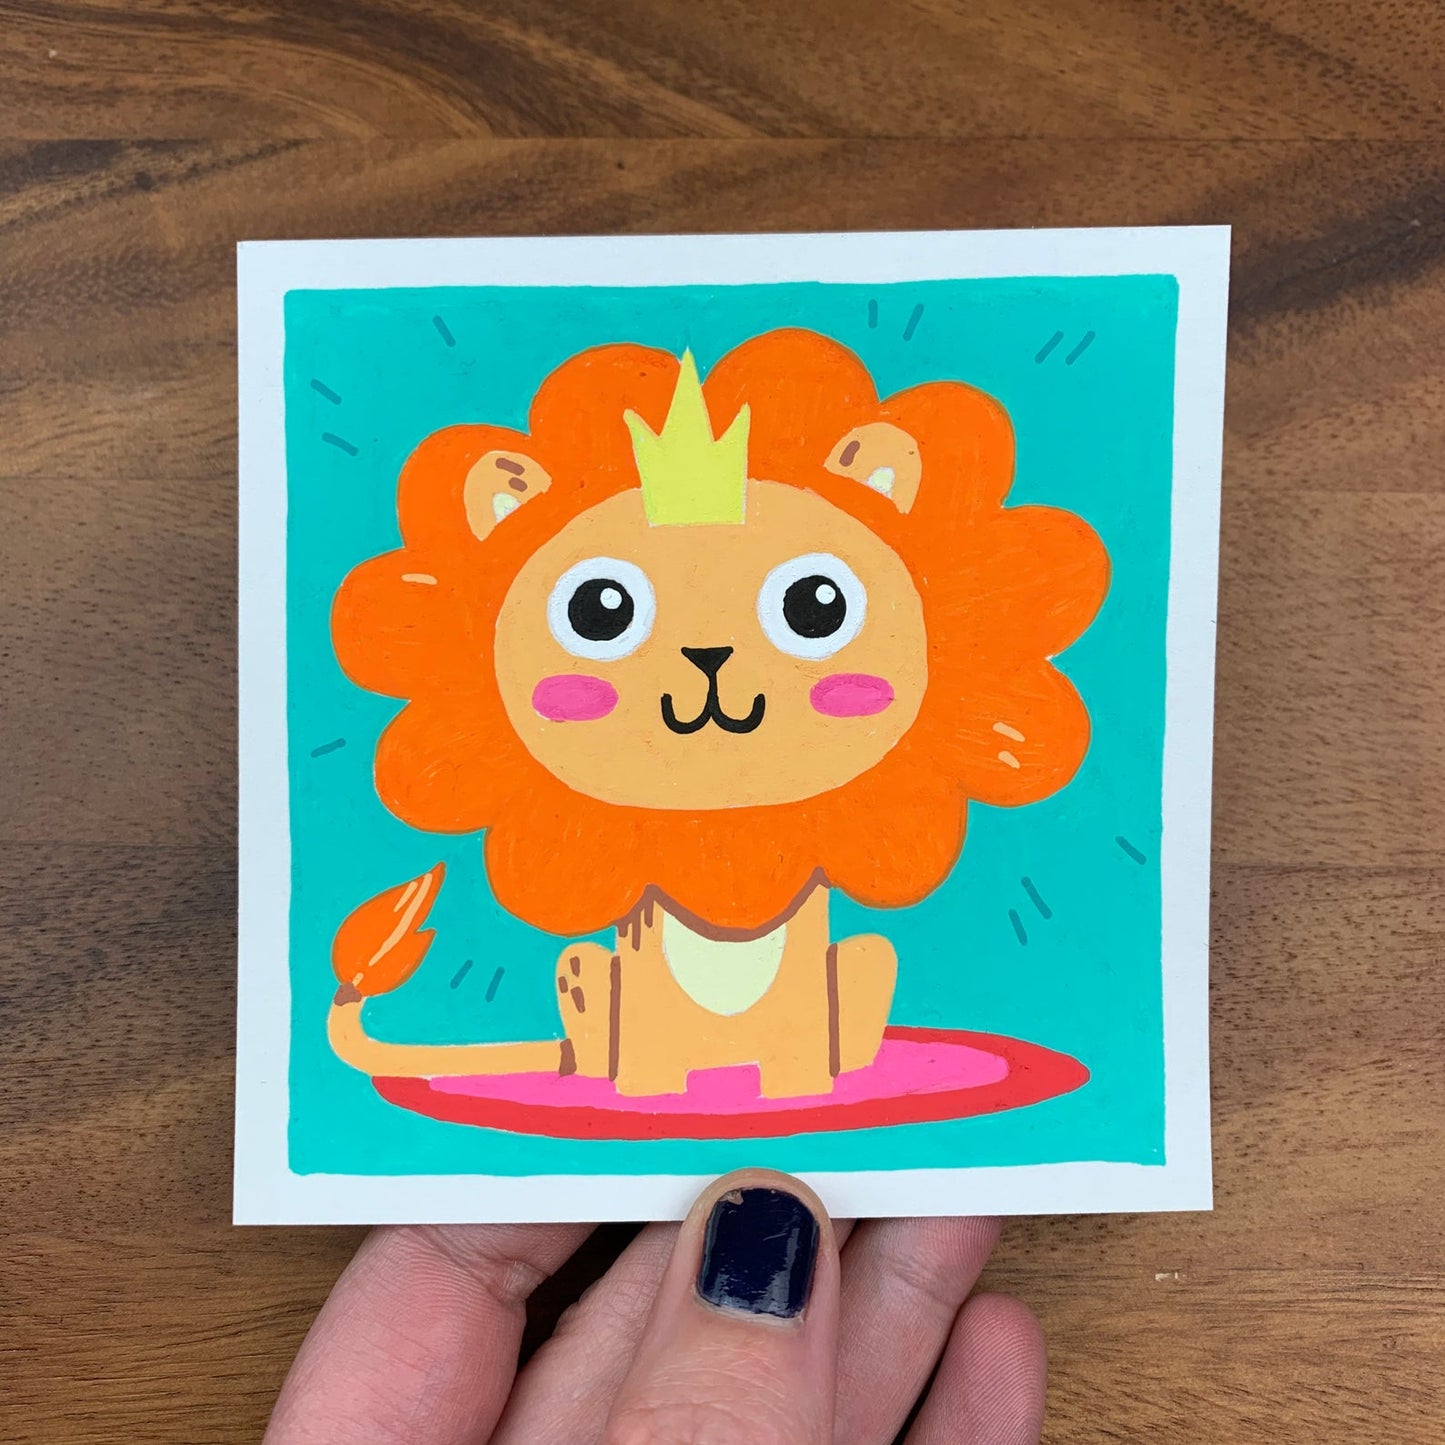 Original artwork of a cute orange lion with a crown sitting on a rug on a teal background. Materials used: Uni-Posca paint markers.